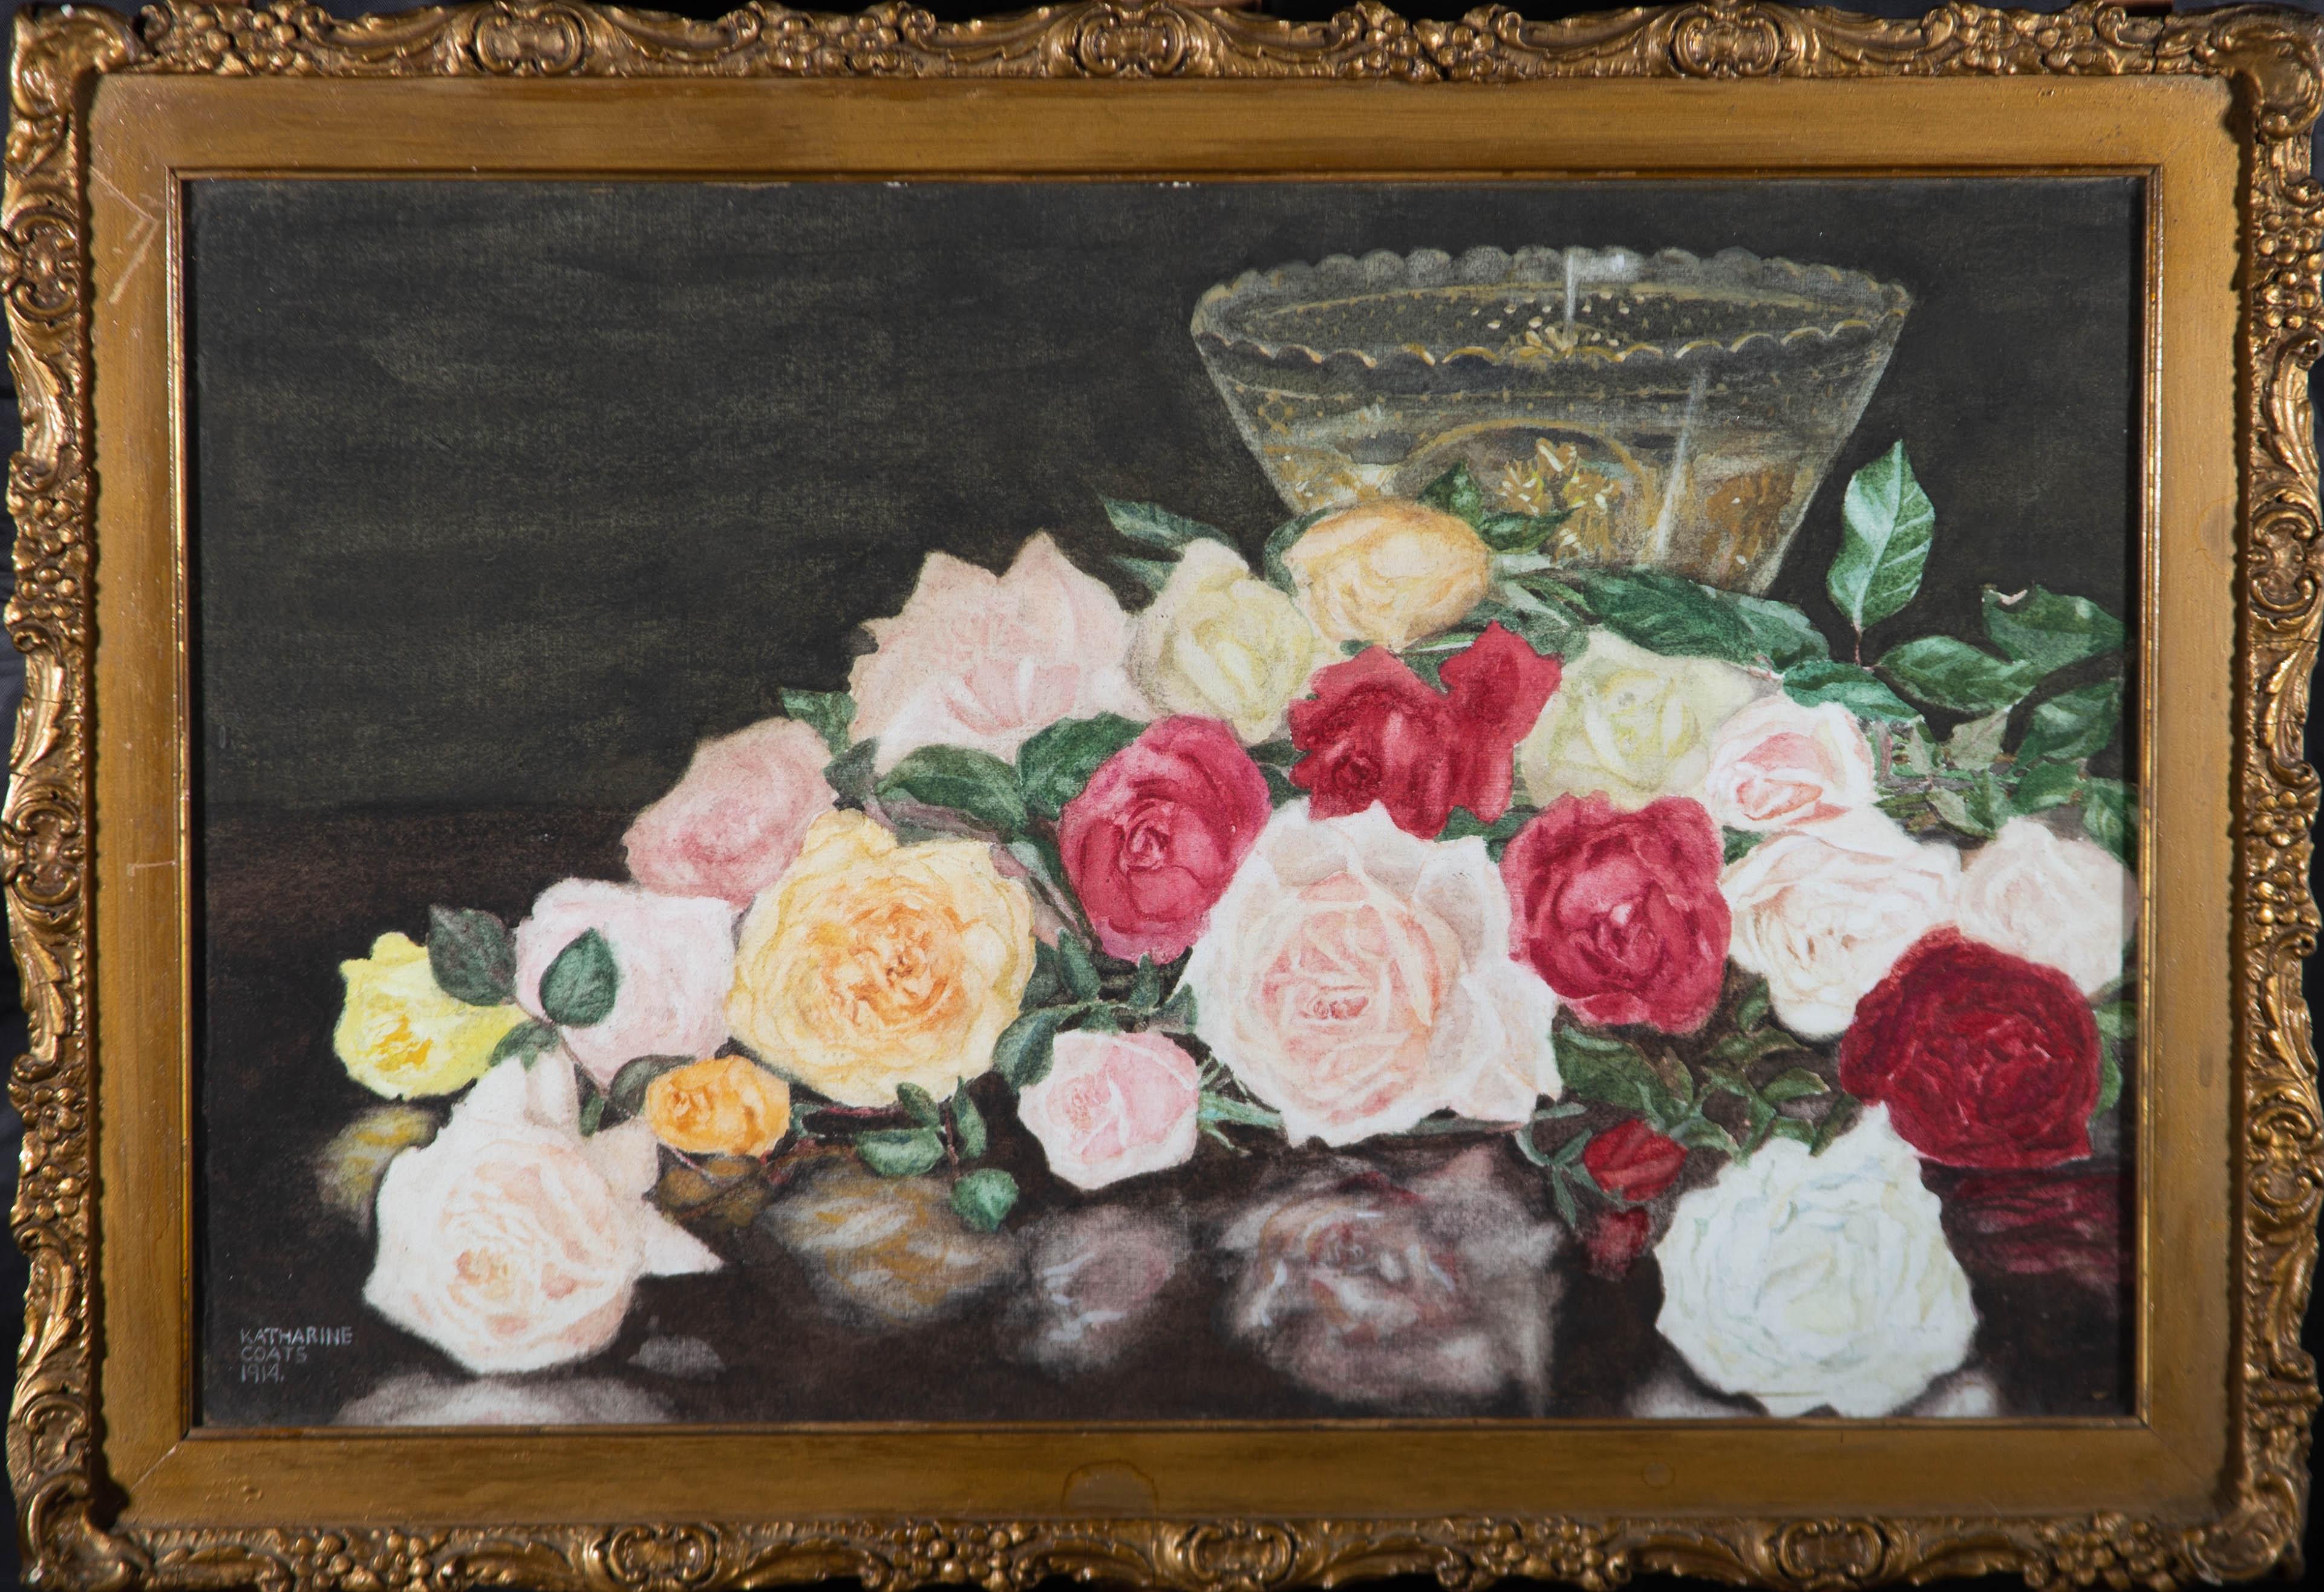 A captivating watercolour painting with gouache on fabric, depicting a still life with roses. Signed and dated to the lower left-hand corner. There is label on the reverse inscribed with the artist's name and title. Well-presented in an ornate gilt